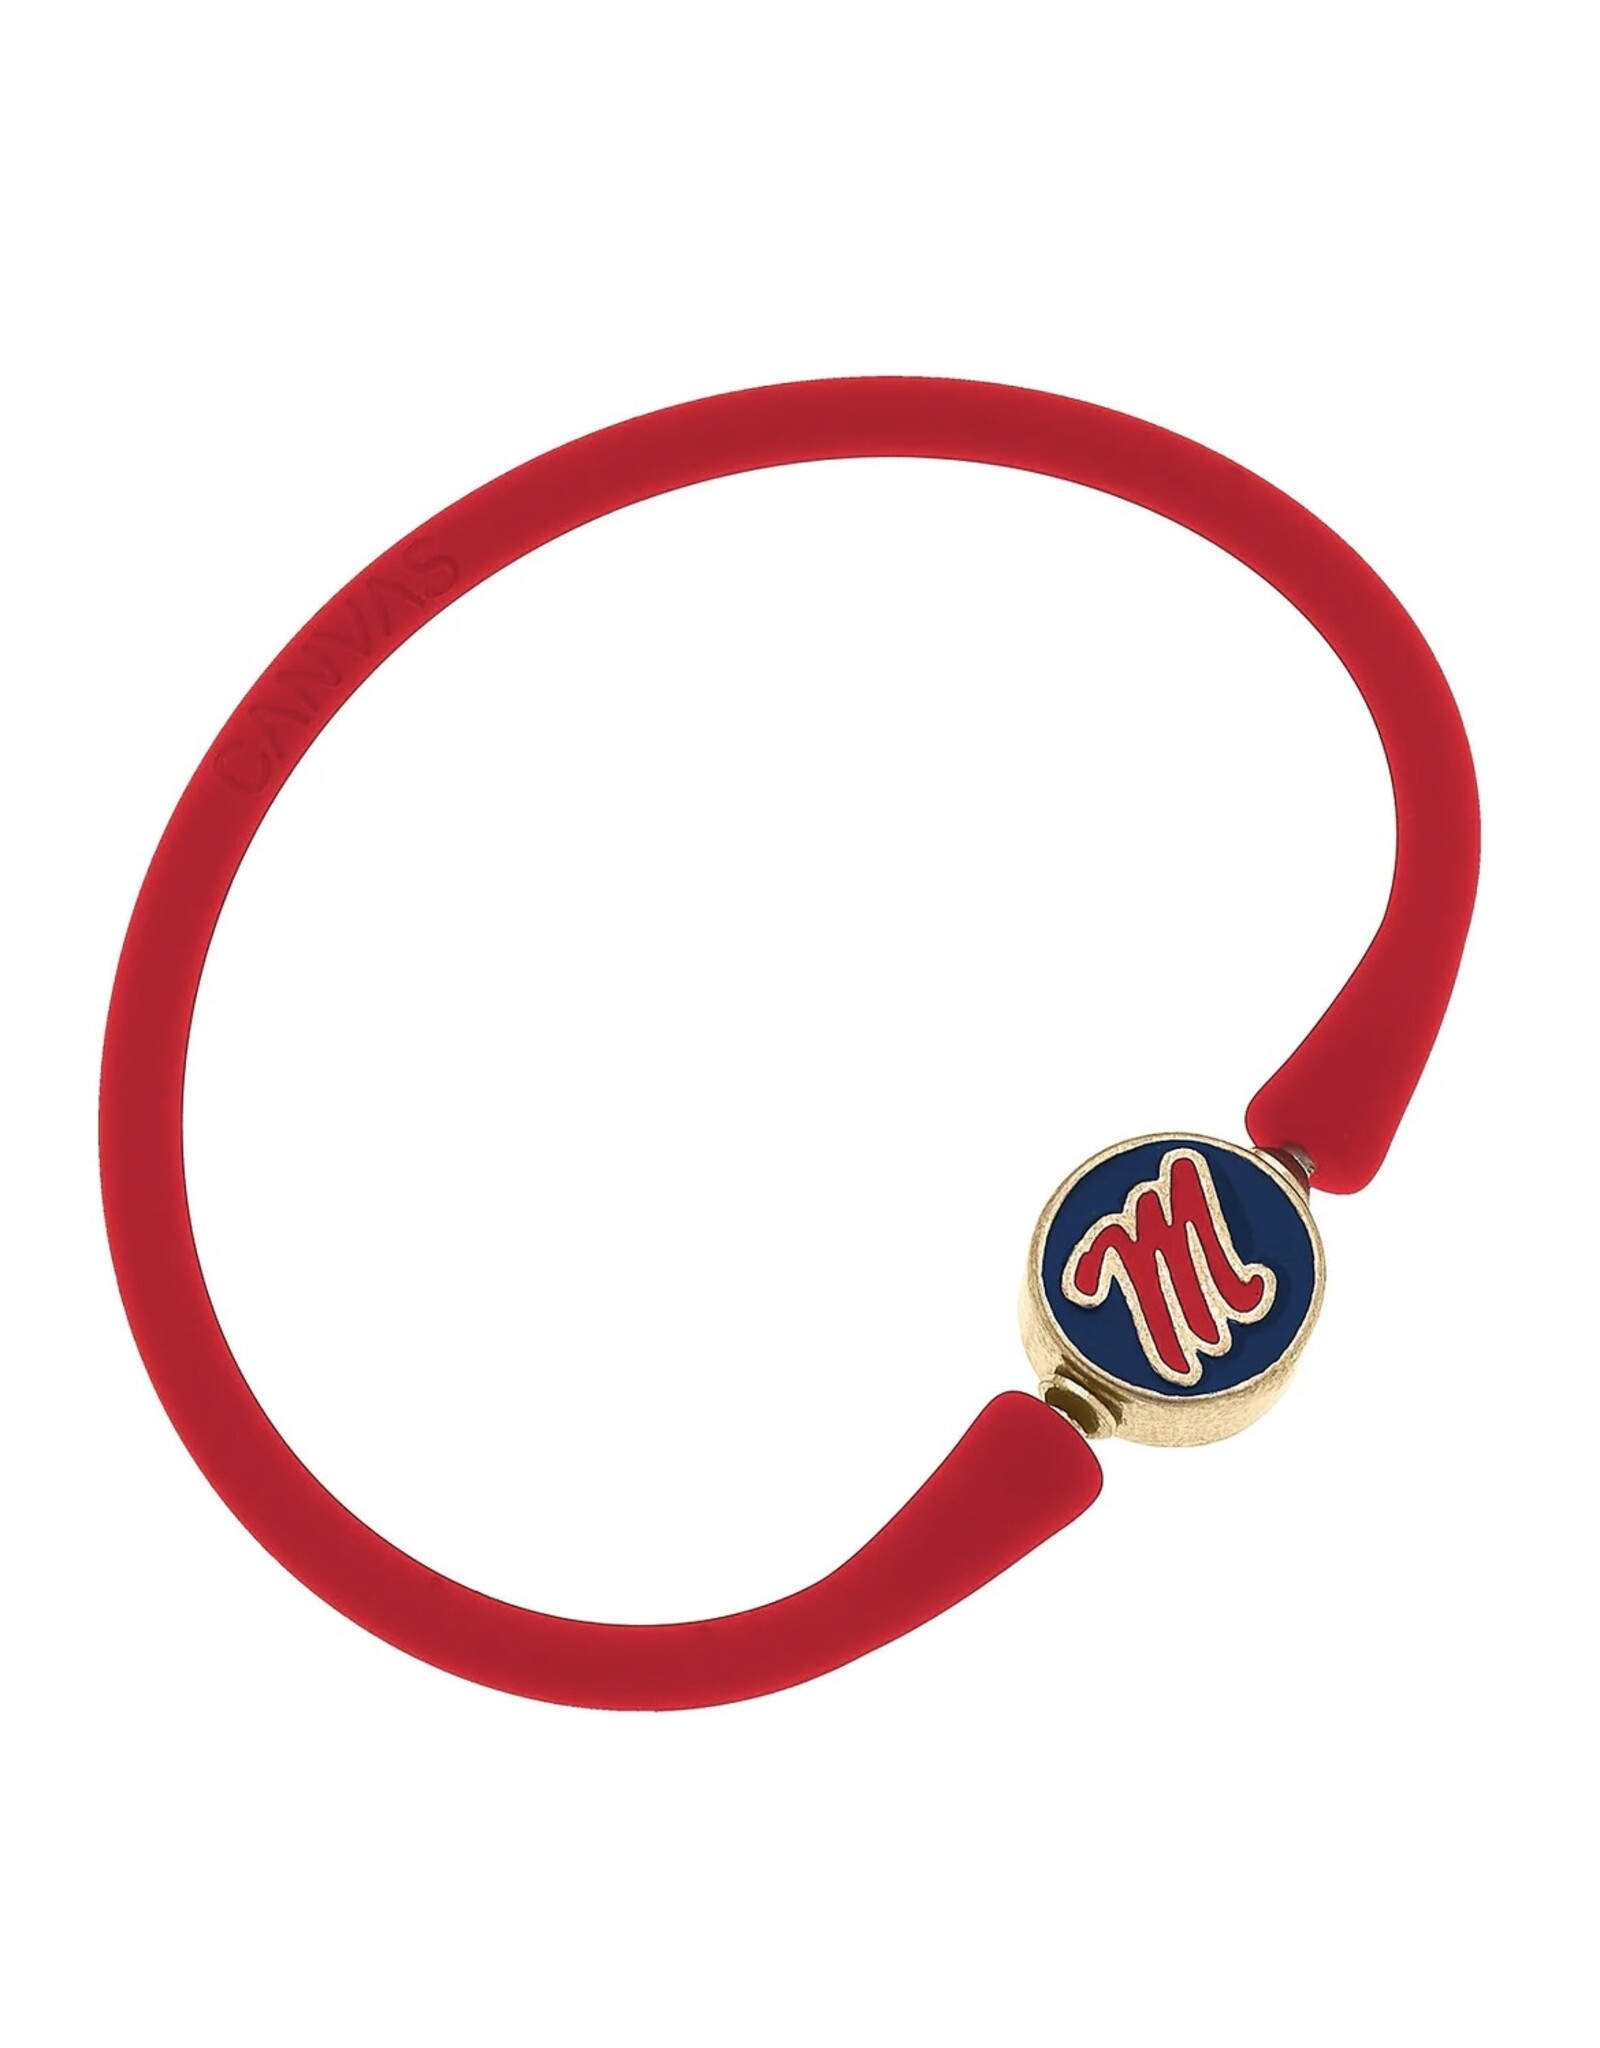 23131B-MS-RD] Ole Miss Rebels Enamel Silicone Bali Bracelet in Red - Heart  of the South